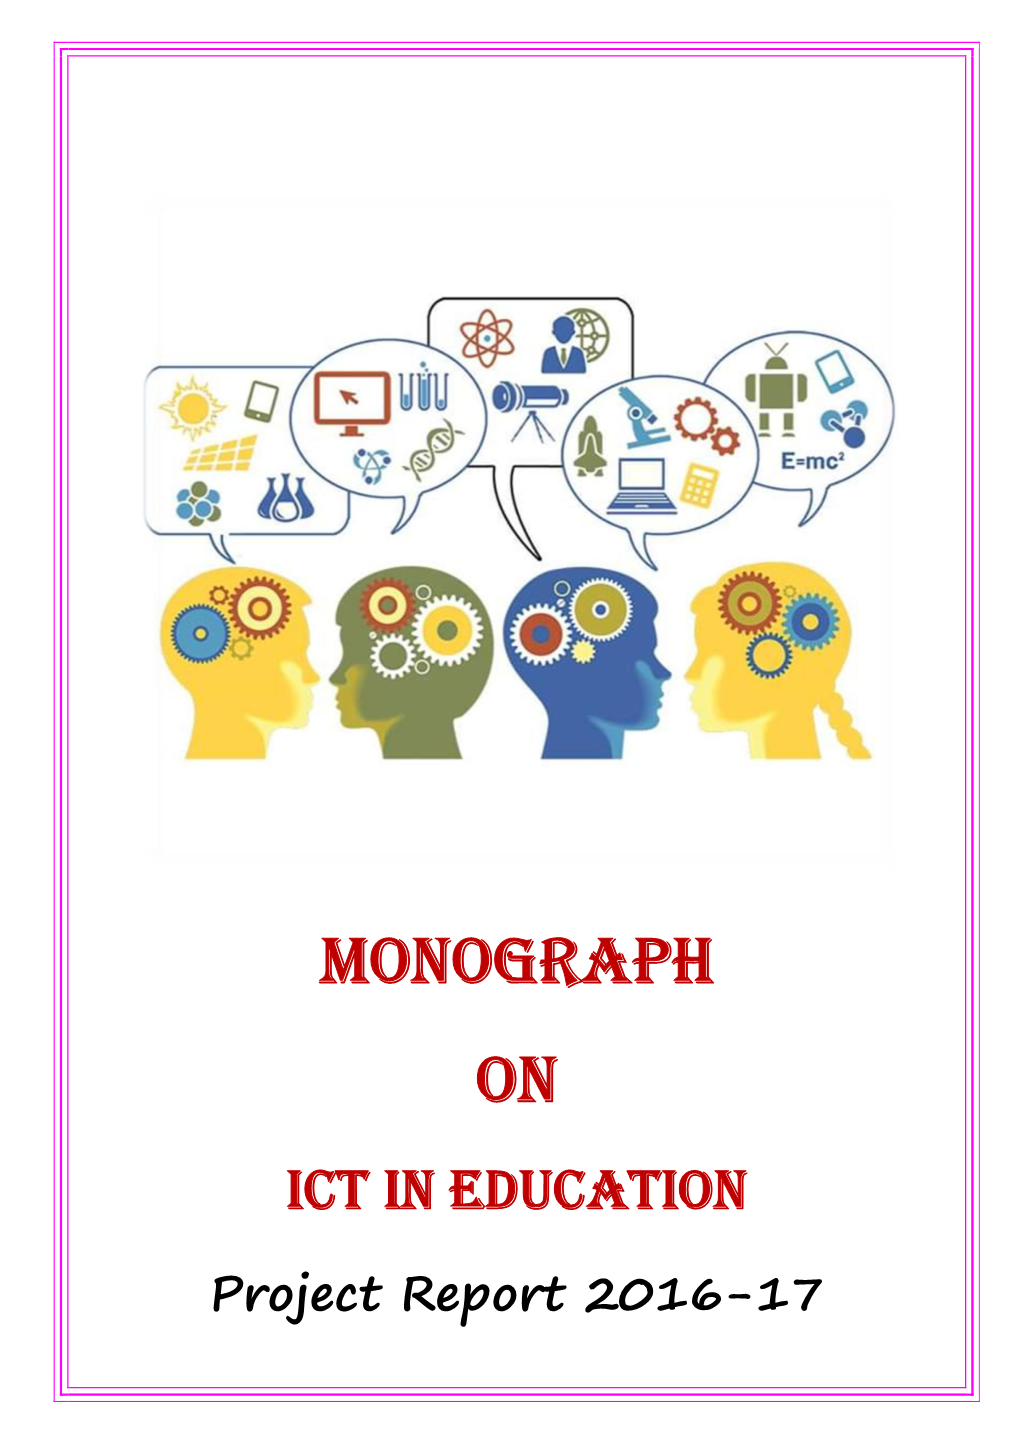 MONOGRAPH on ICT in EDUCATION